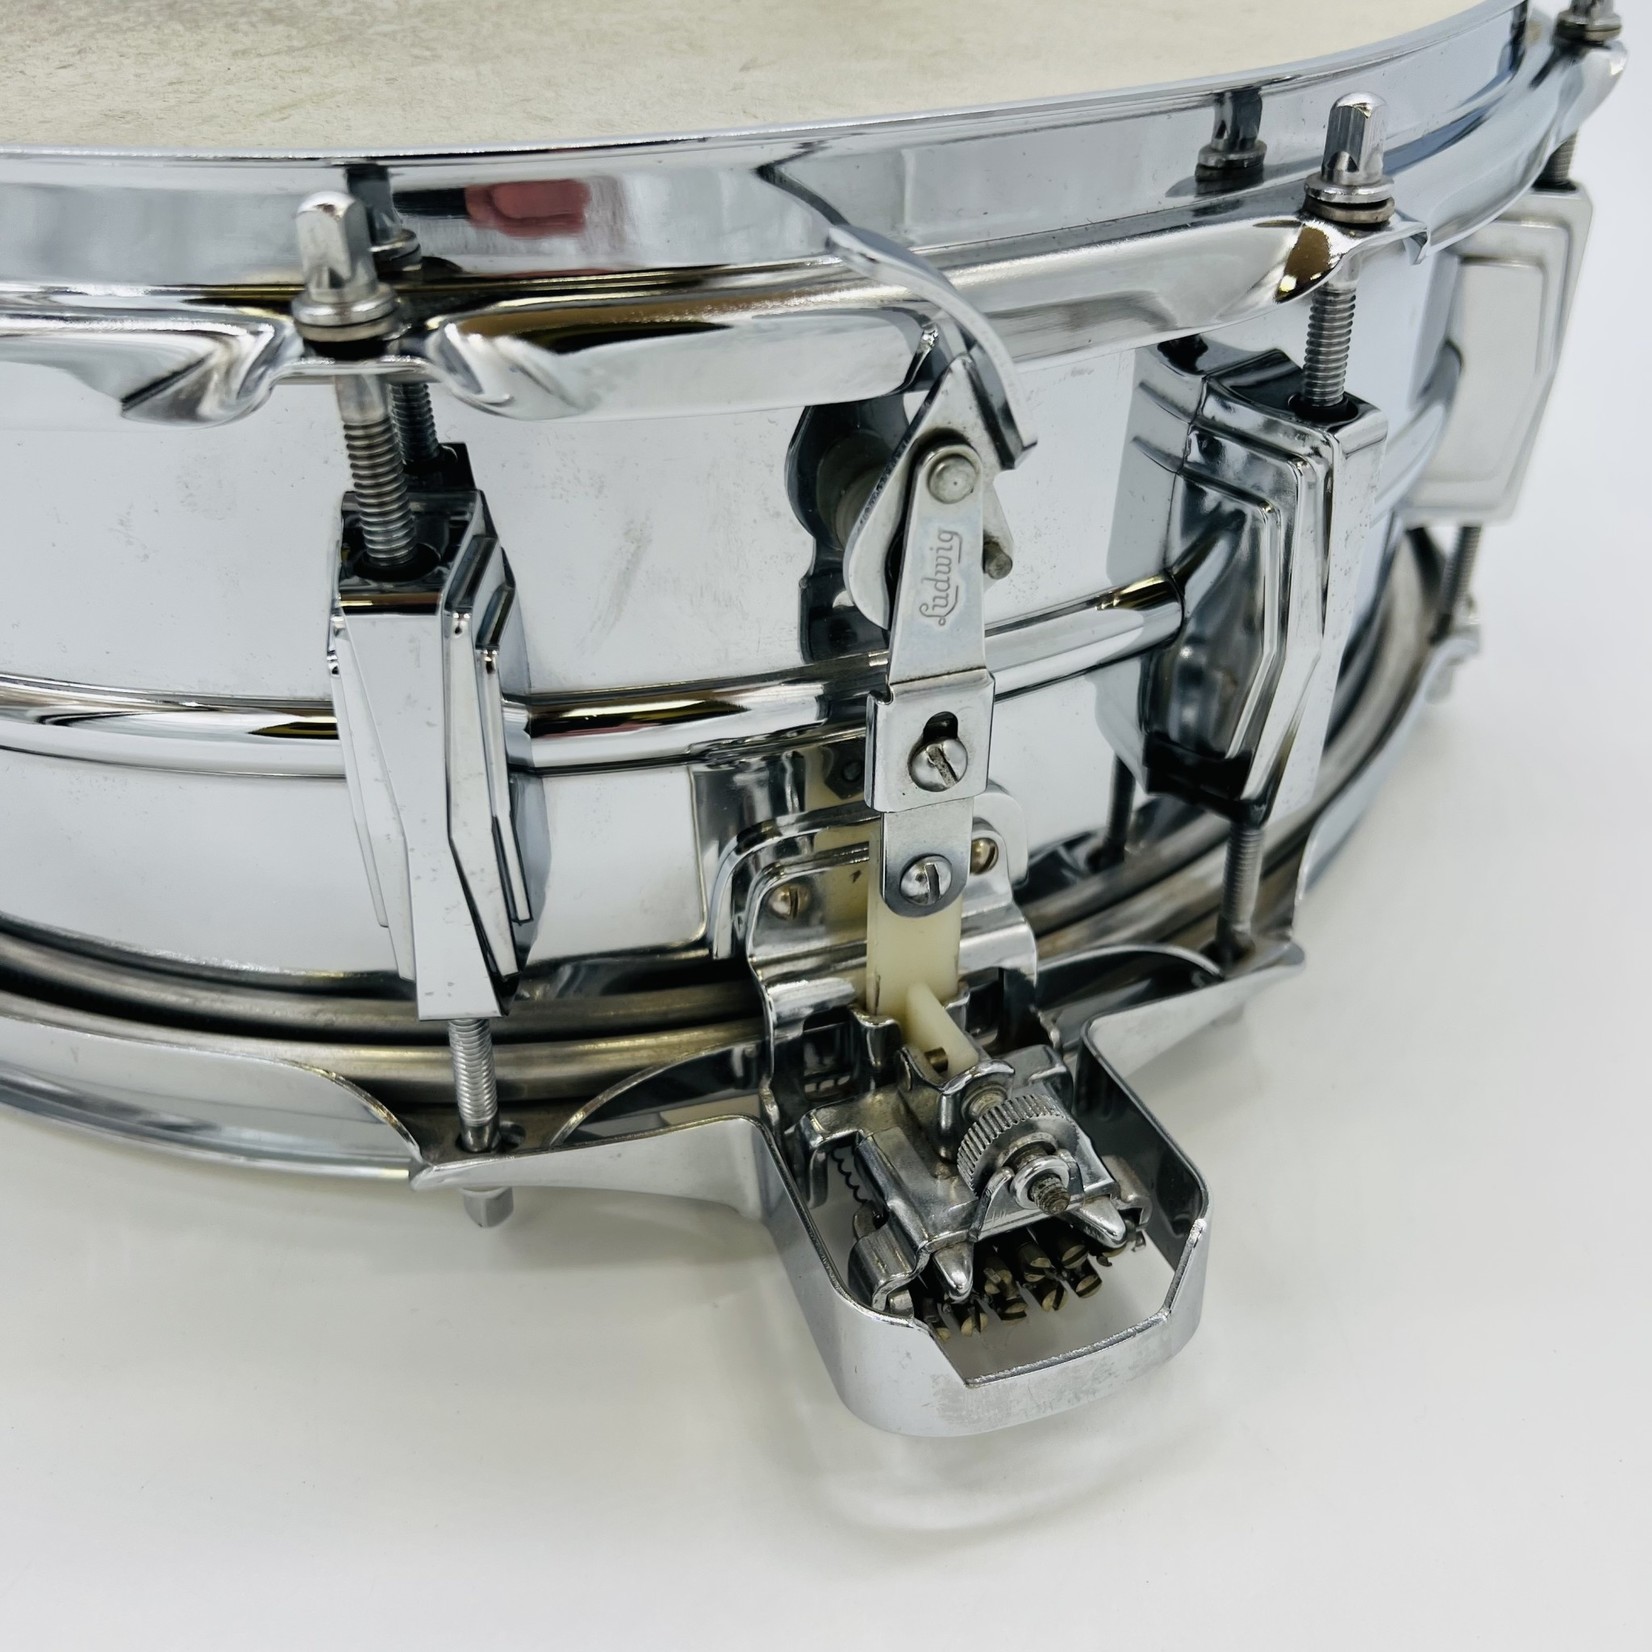 Ludwig 1965 Ludwig LM410 Supersensitive 5x14" Snare Drum (All Original)